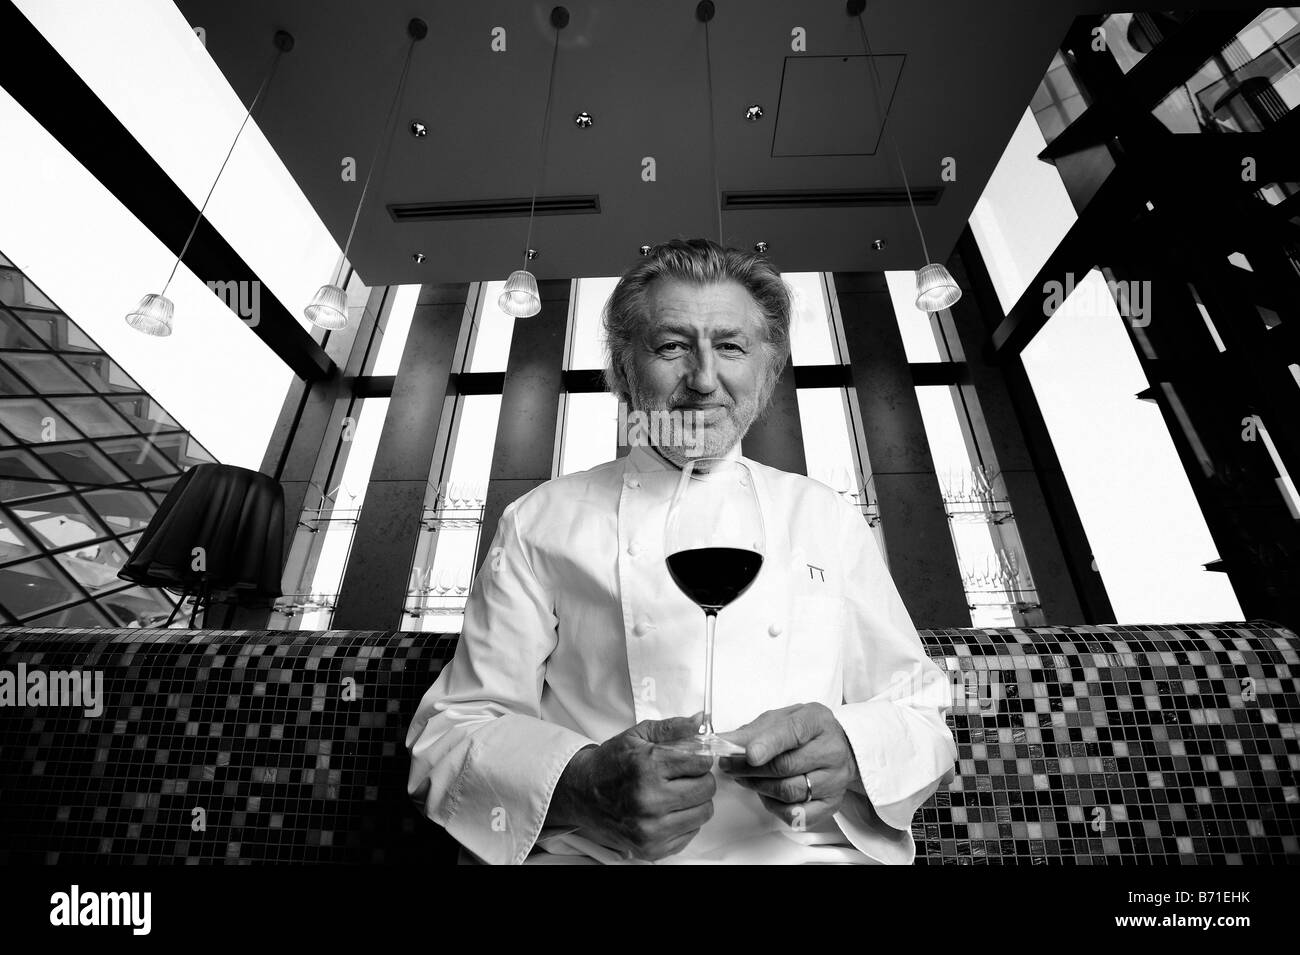 French chef Pierre Gagnaire poses with a glass of wine at his restaurant in Tokyo Japan Stock Photo